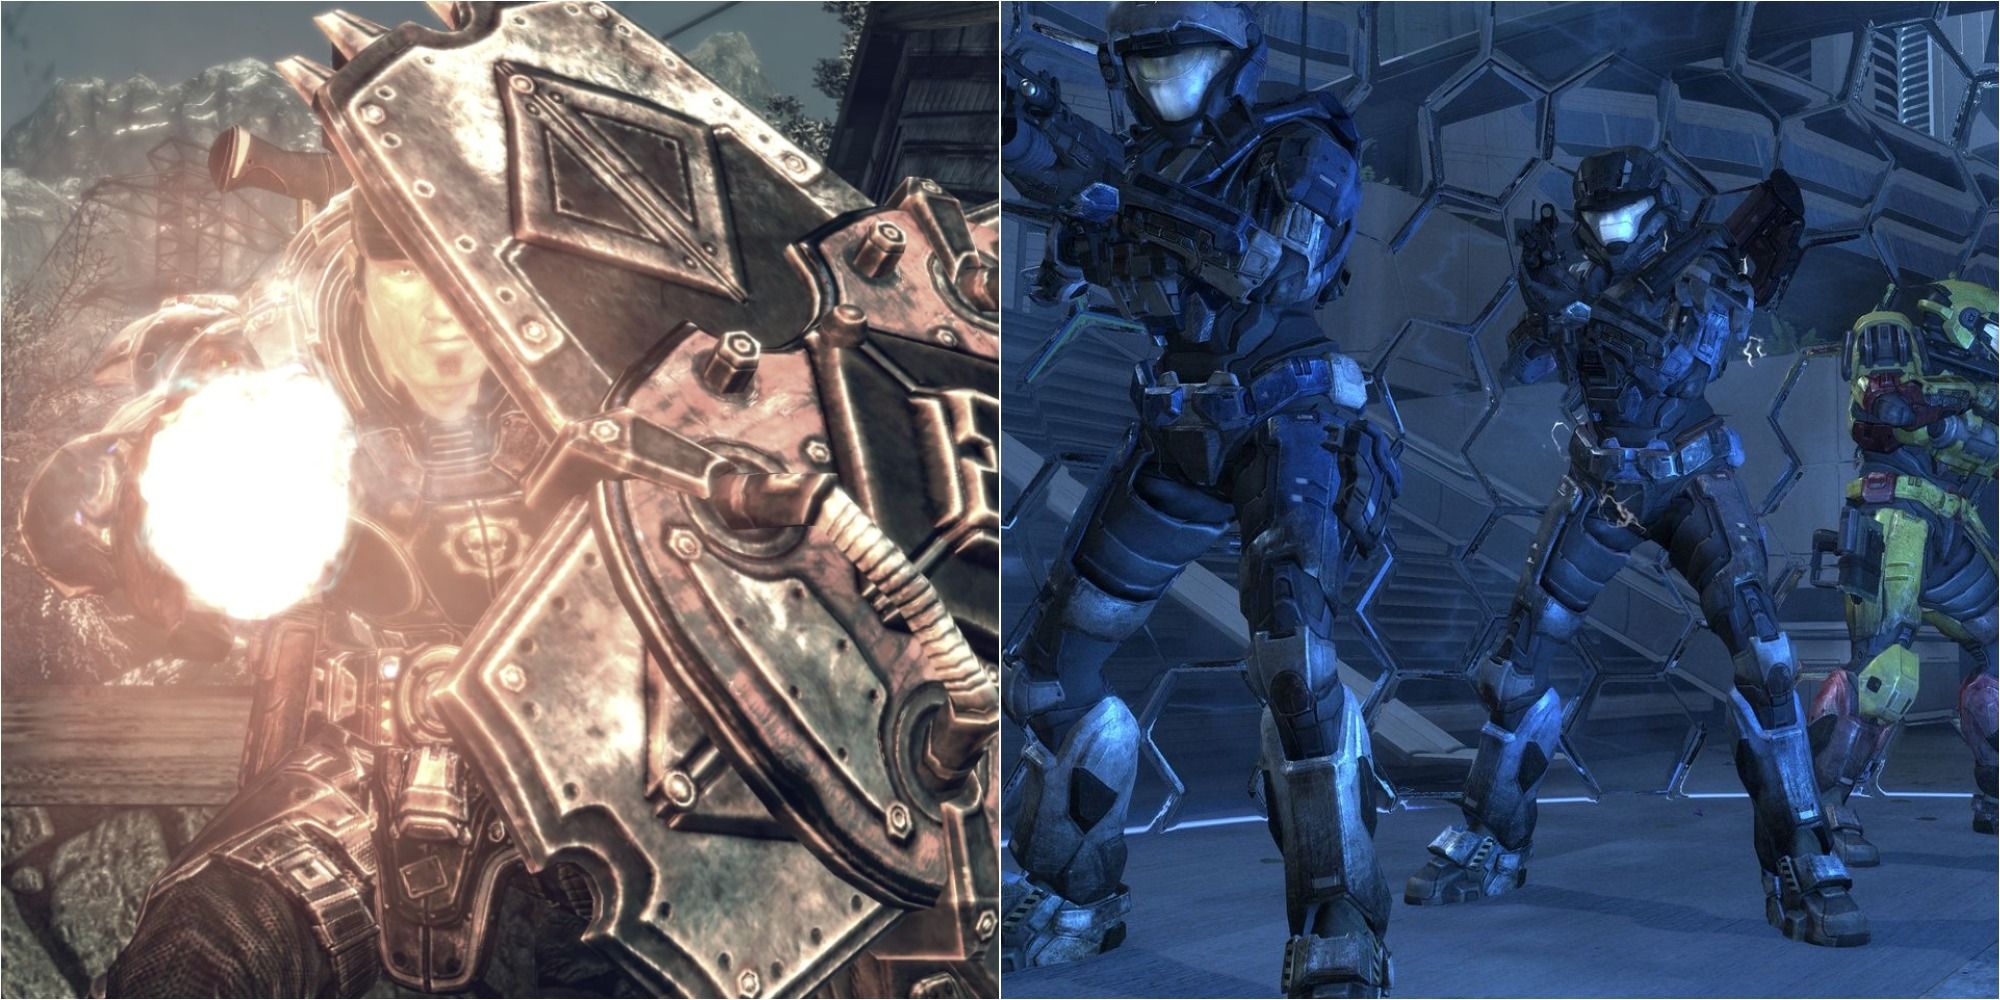 Best Video Games Shields Featured Split Image Gears Of War and Halo Reach